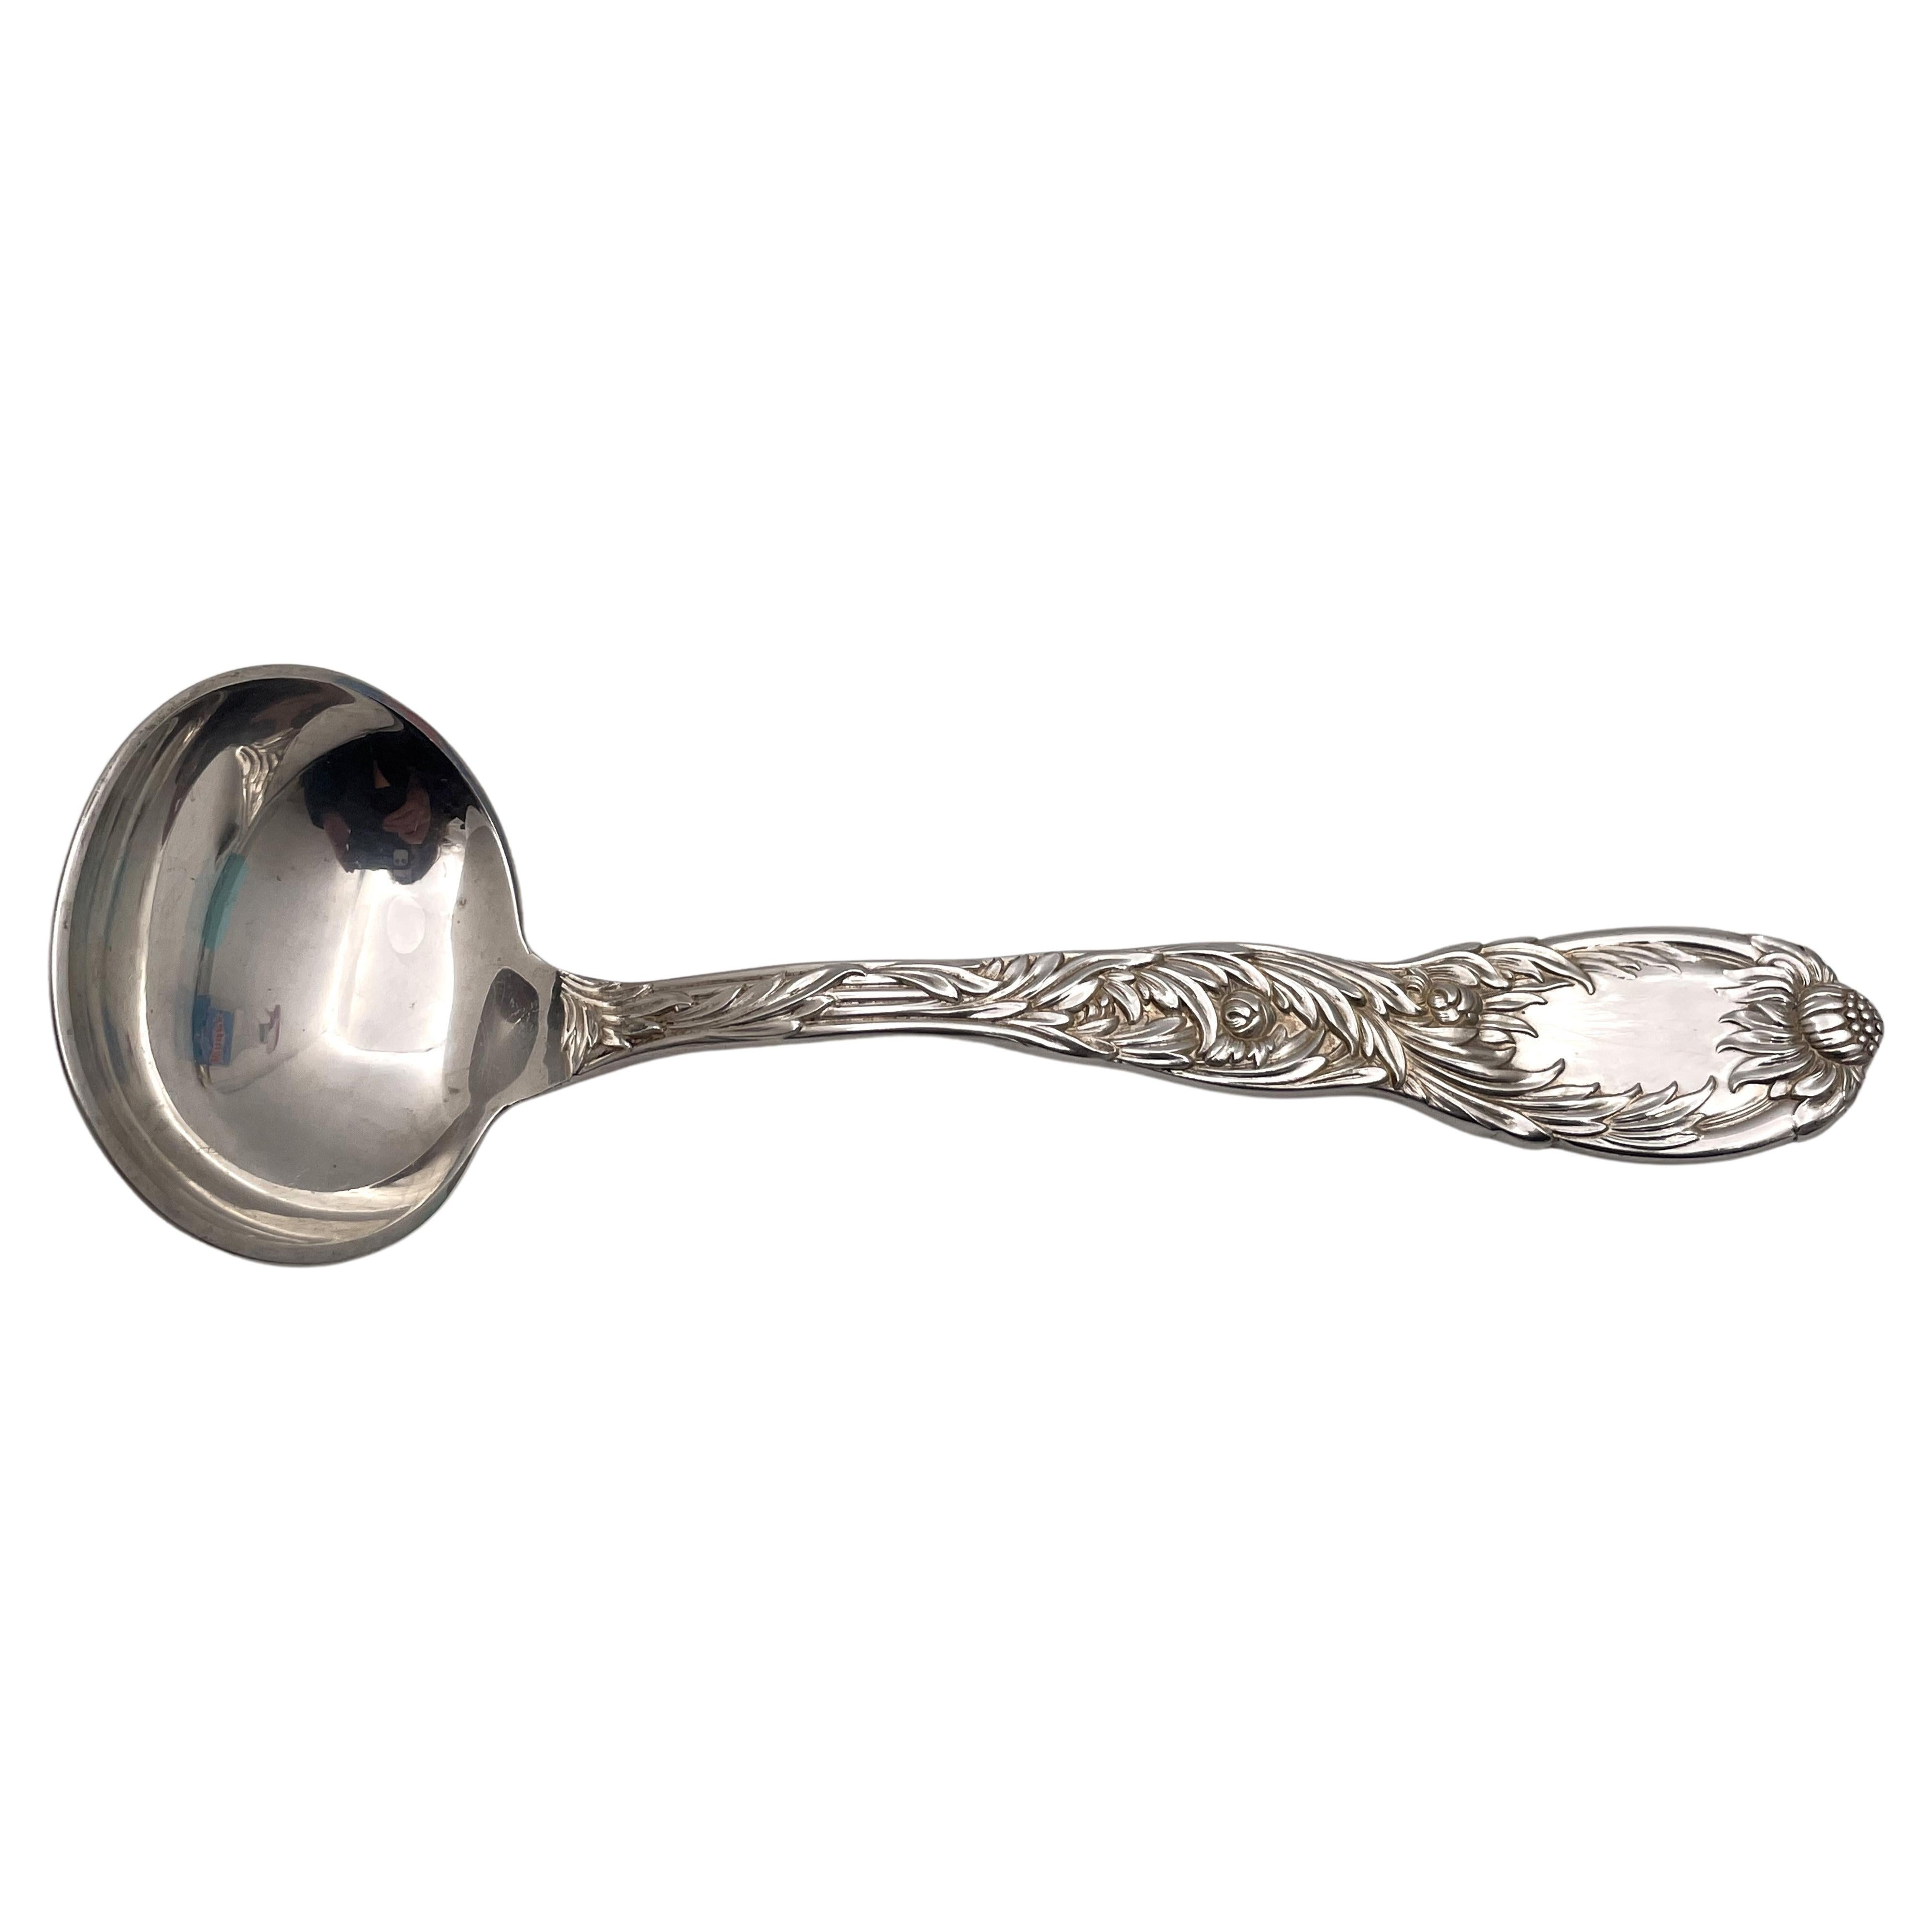 Tiffany & Co. Sterling Silver Chrysanthemum Gravy Ladle For Sale